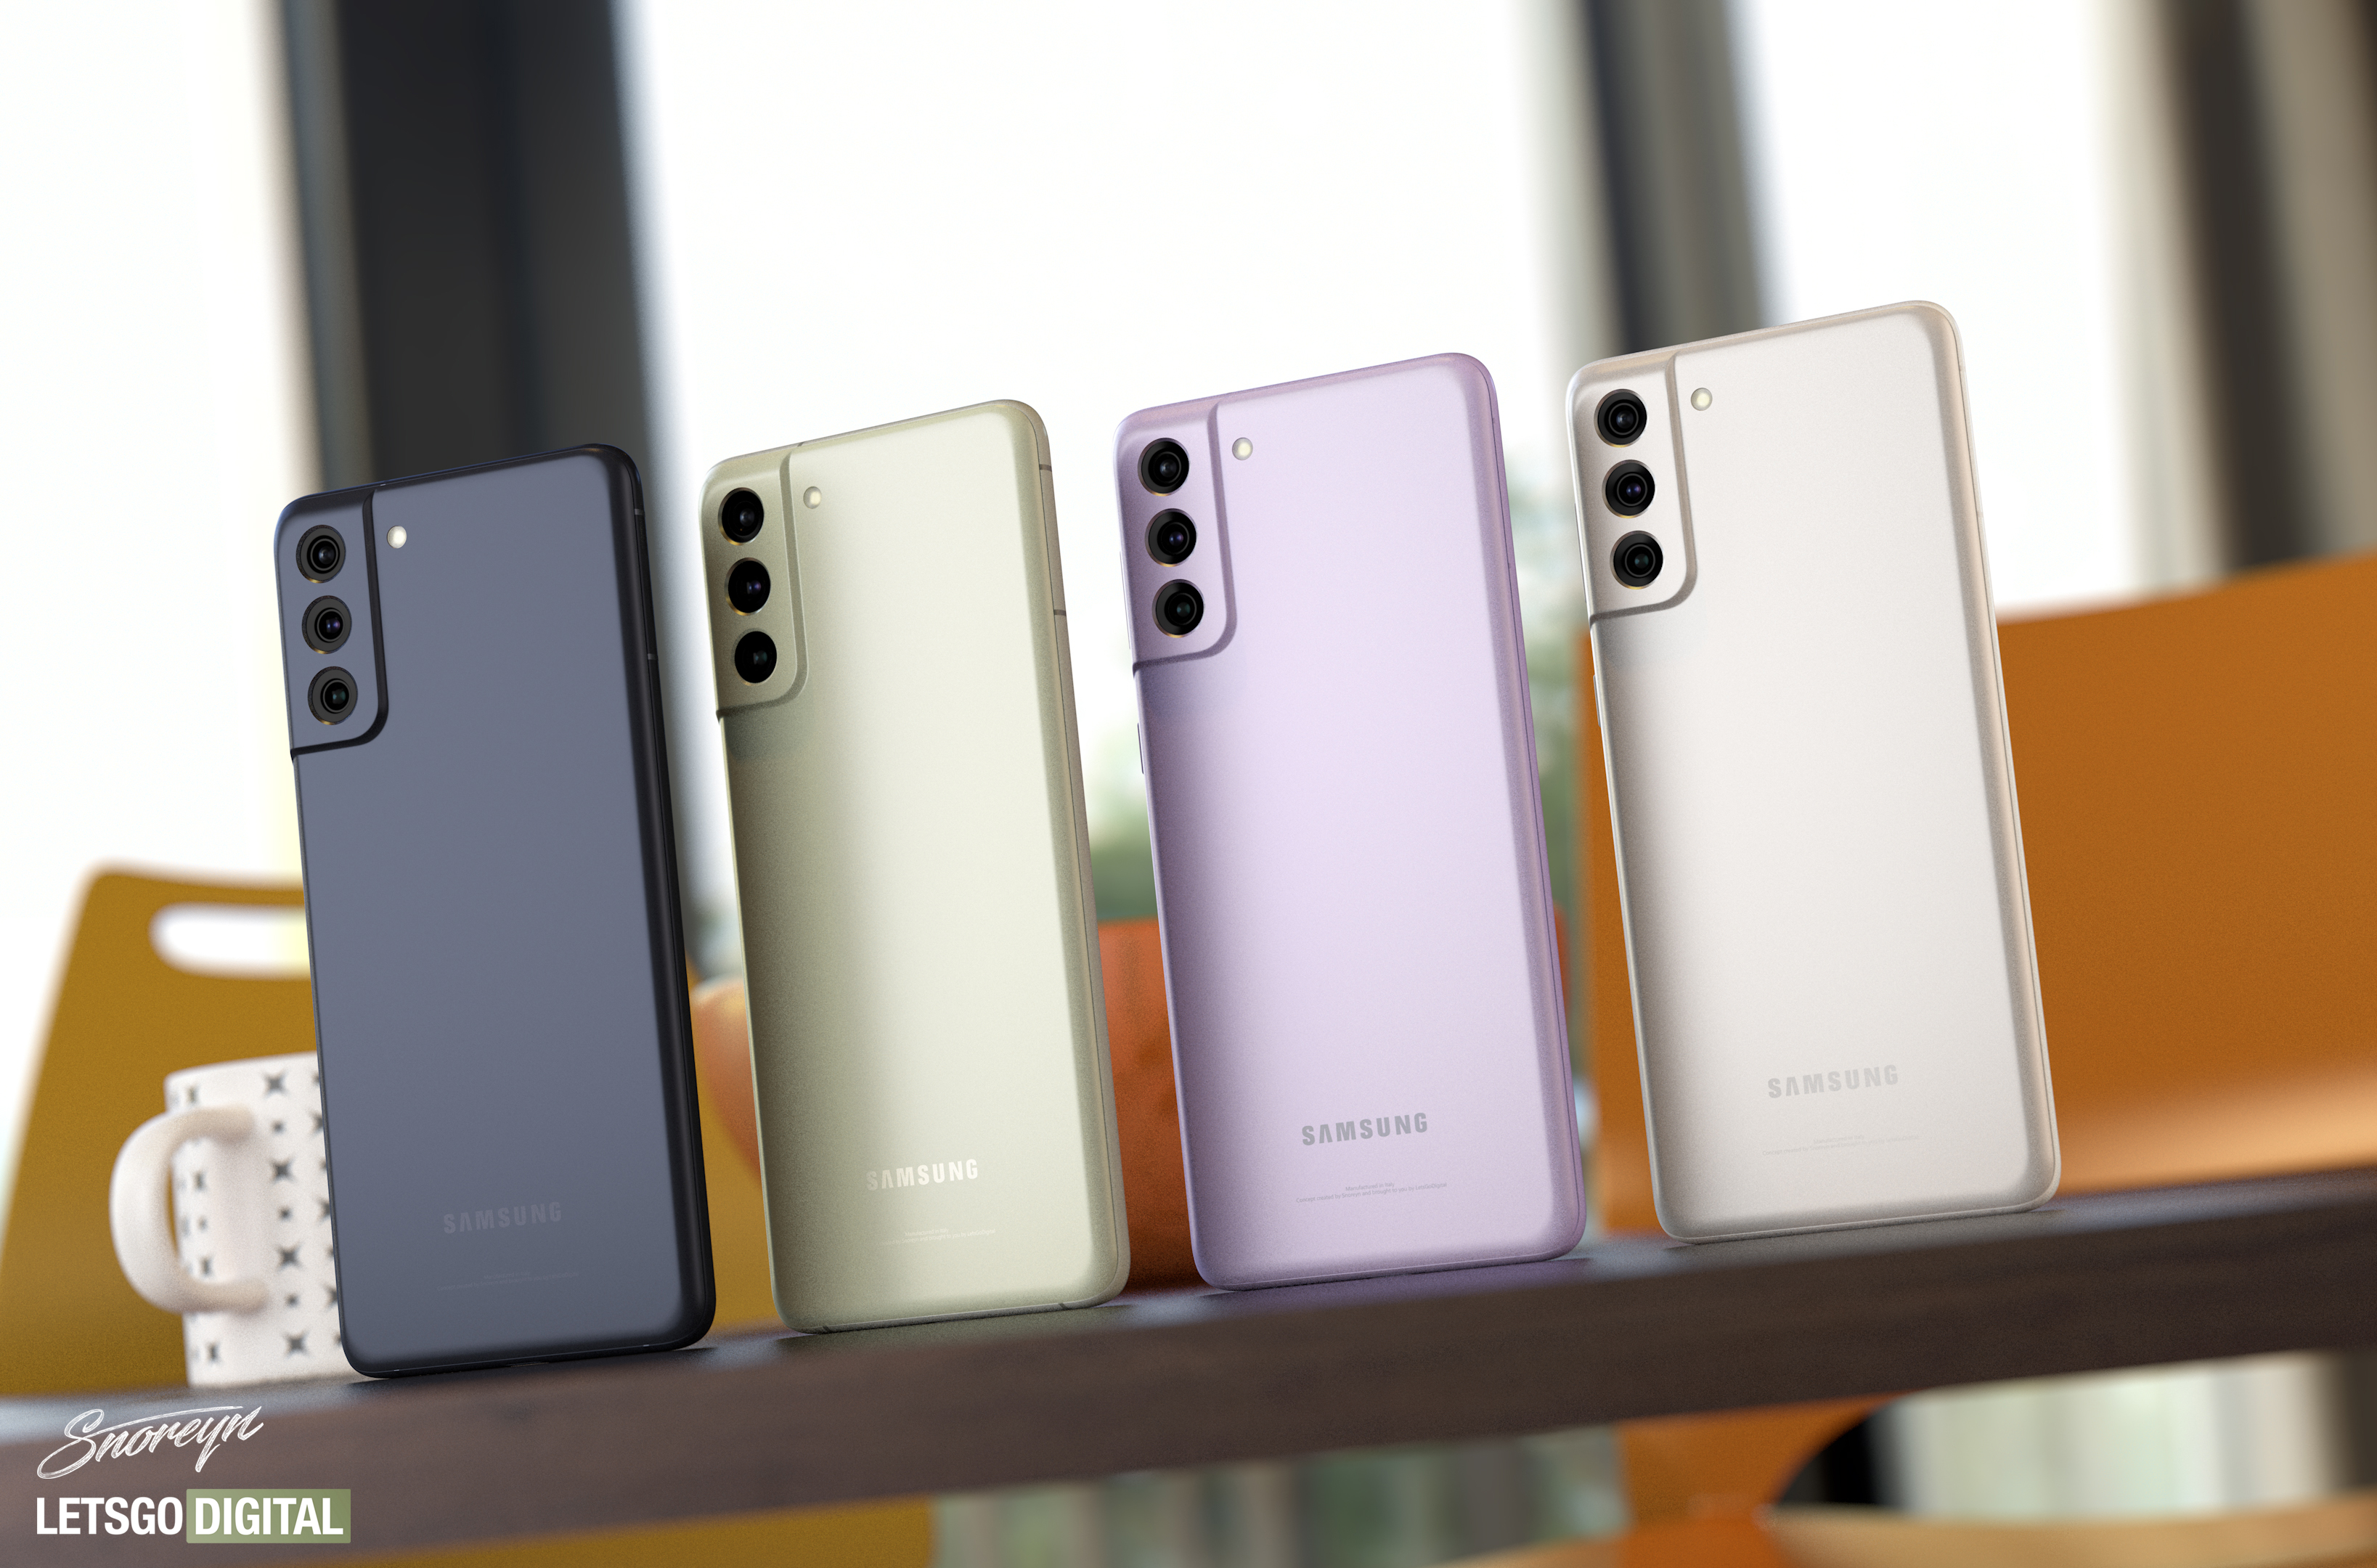 An unofficial render of four Samsung Galaxy S21 FE devices in the four available colors: black, light green, light purple and grey